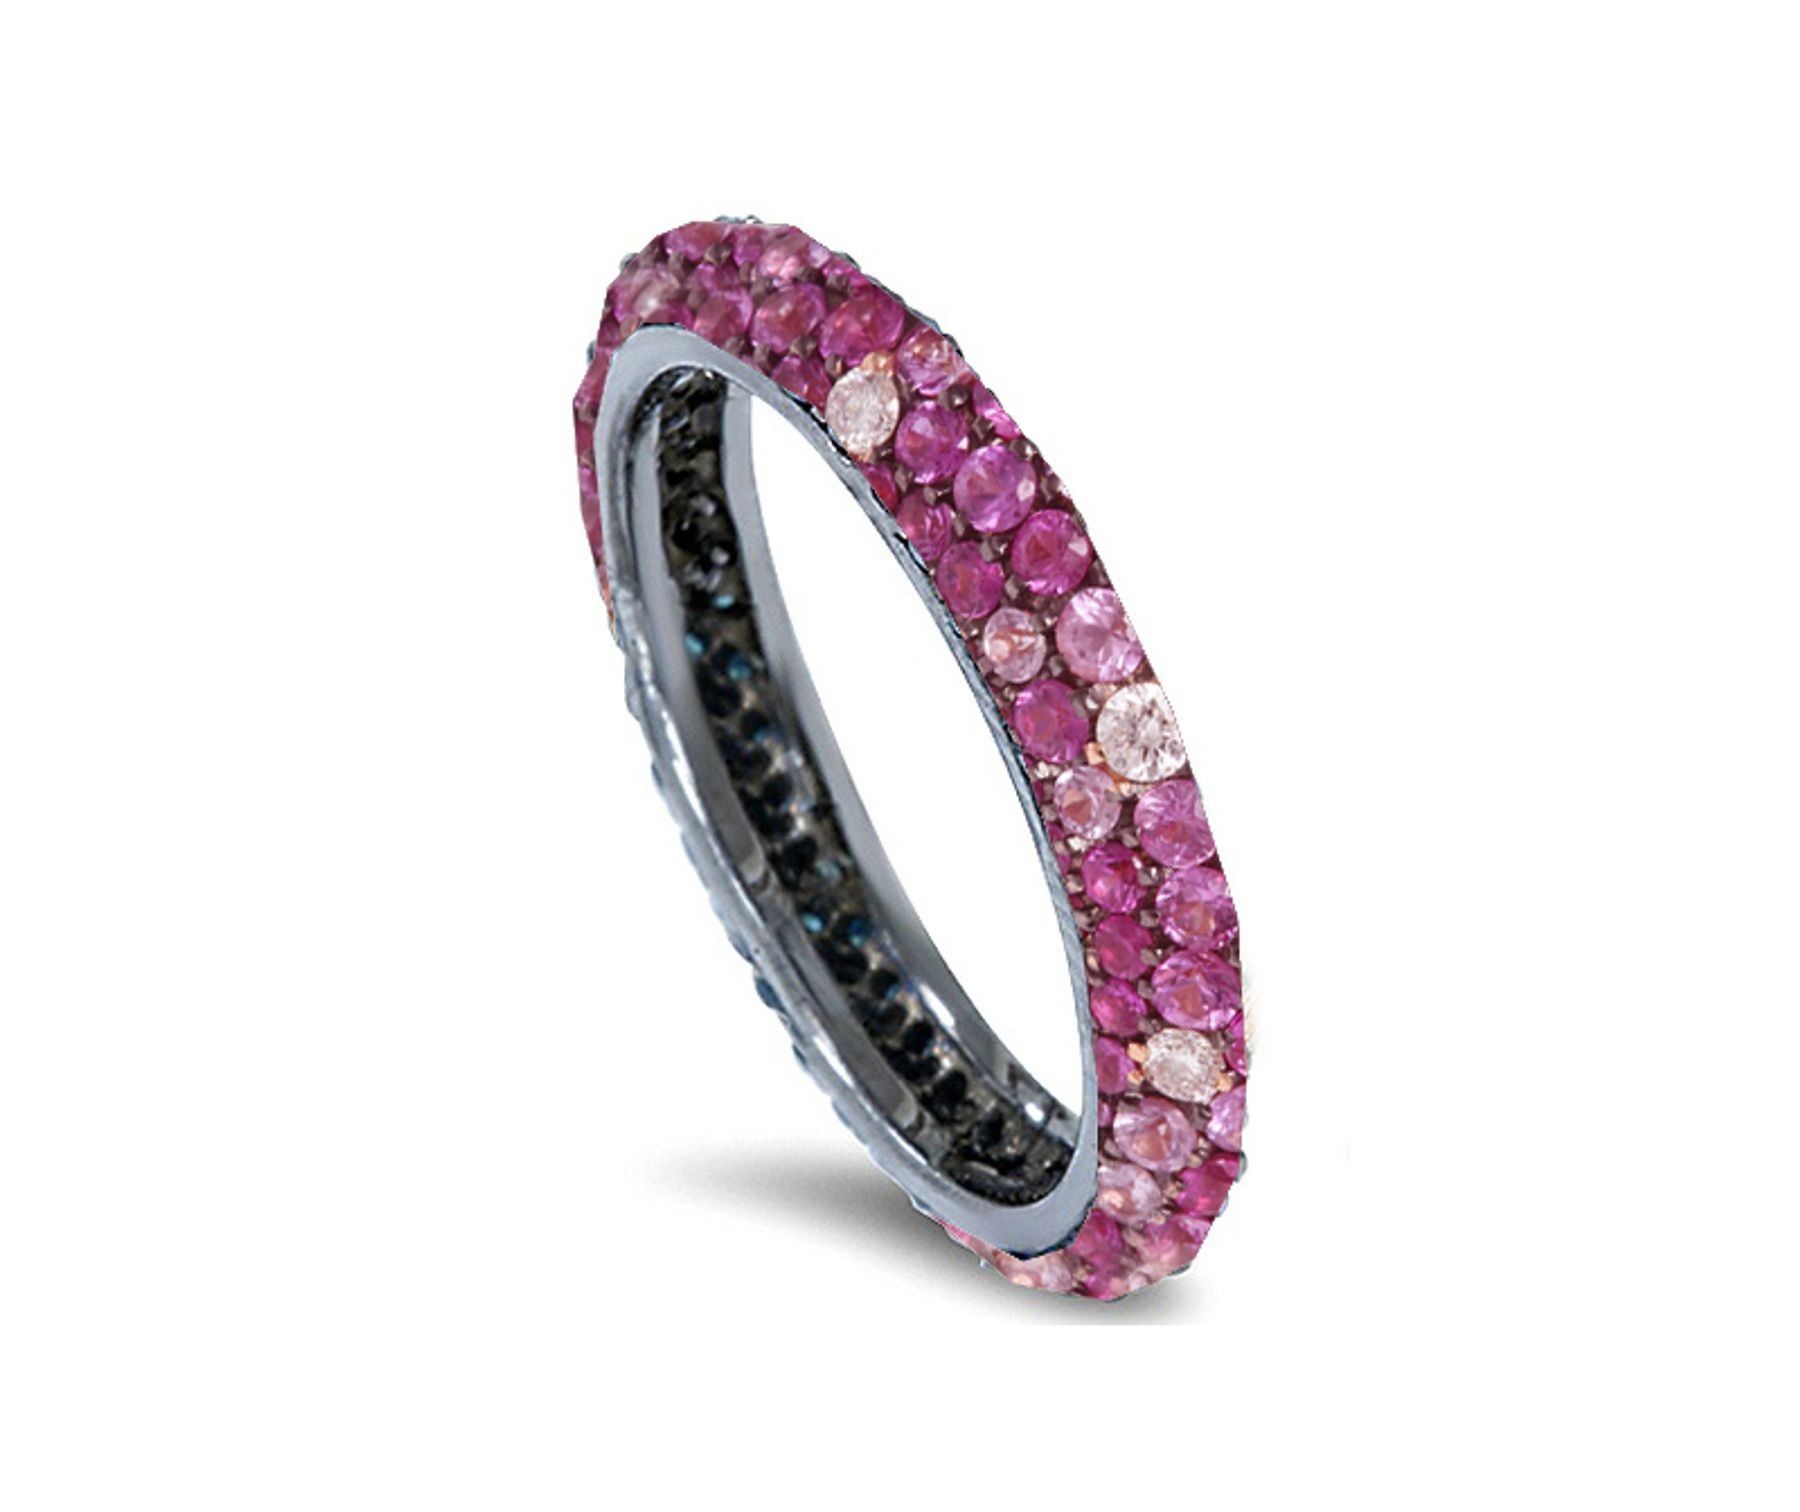 Delicate Women's Eternity Rings Featuring Vivid Pink Sapphires & Diamonds in Precision Micro pave Settings